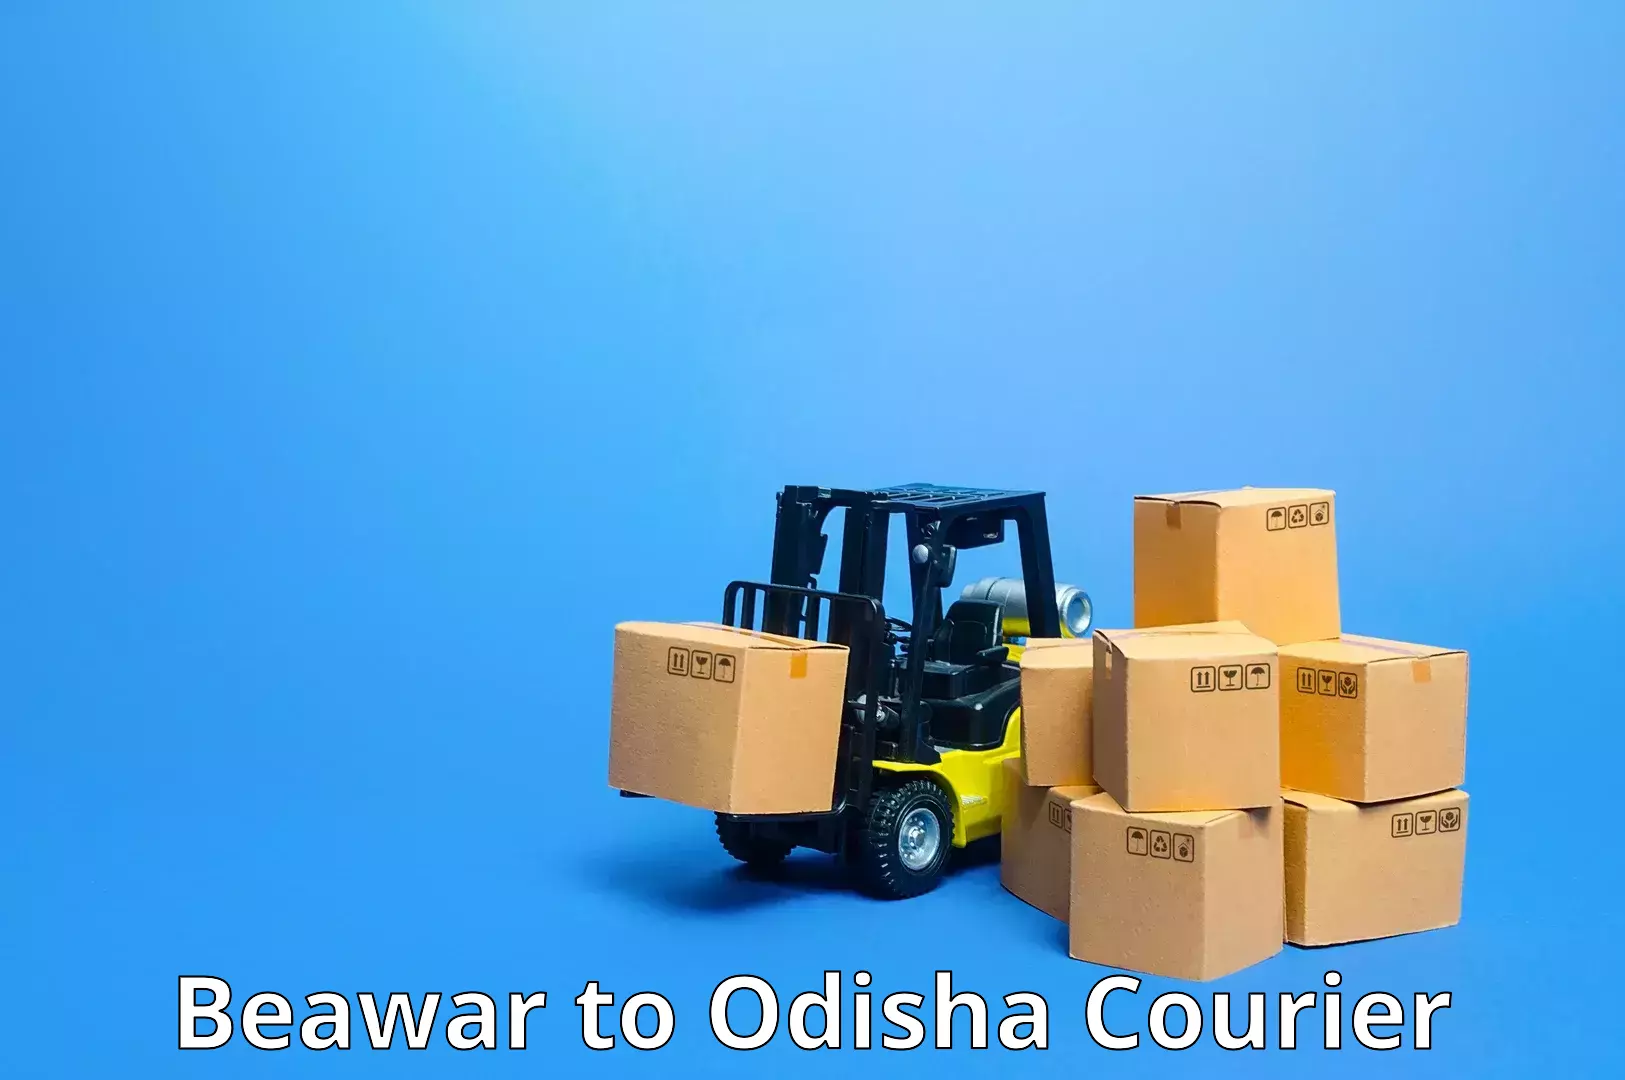 Overnight delivery services Beawar to Muribahal